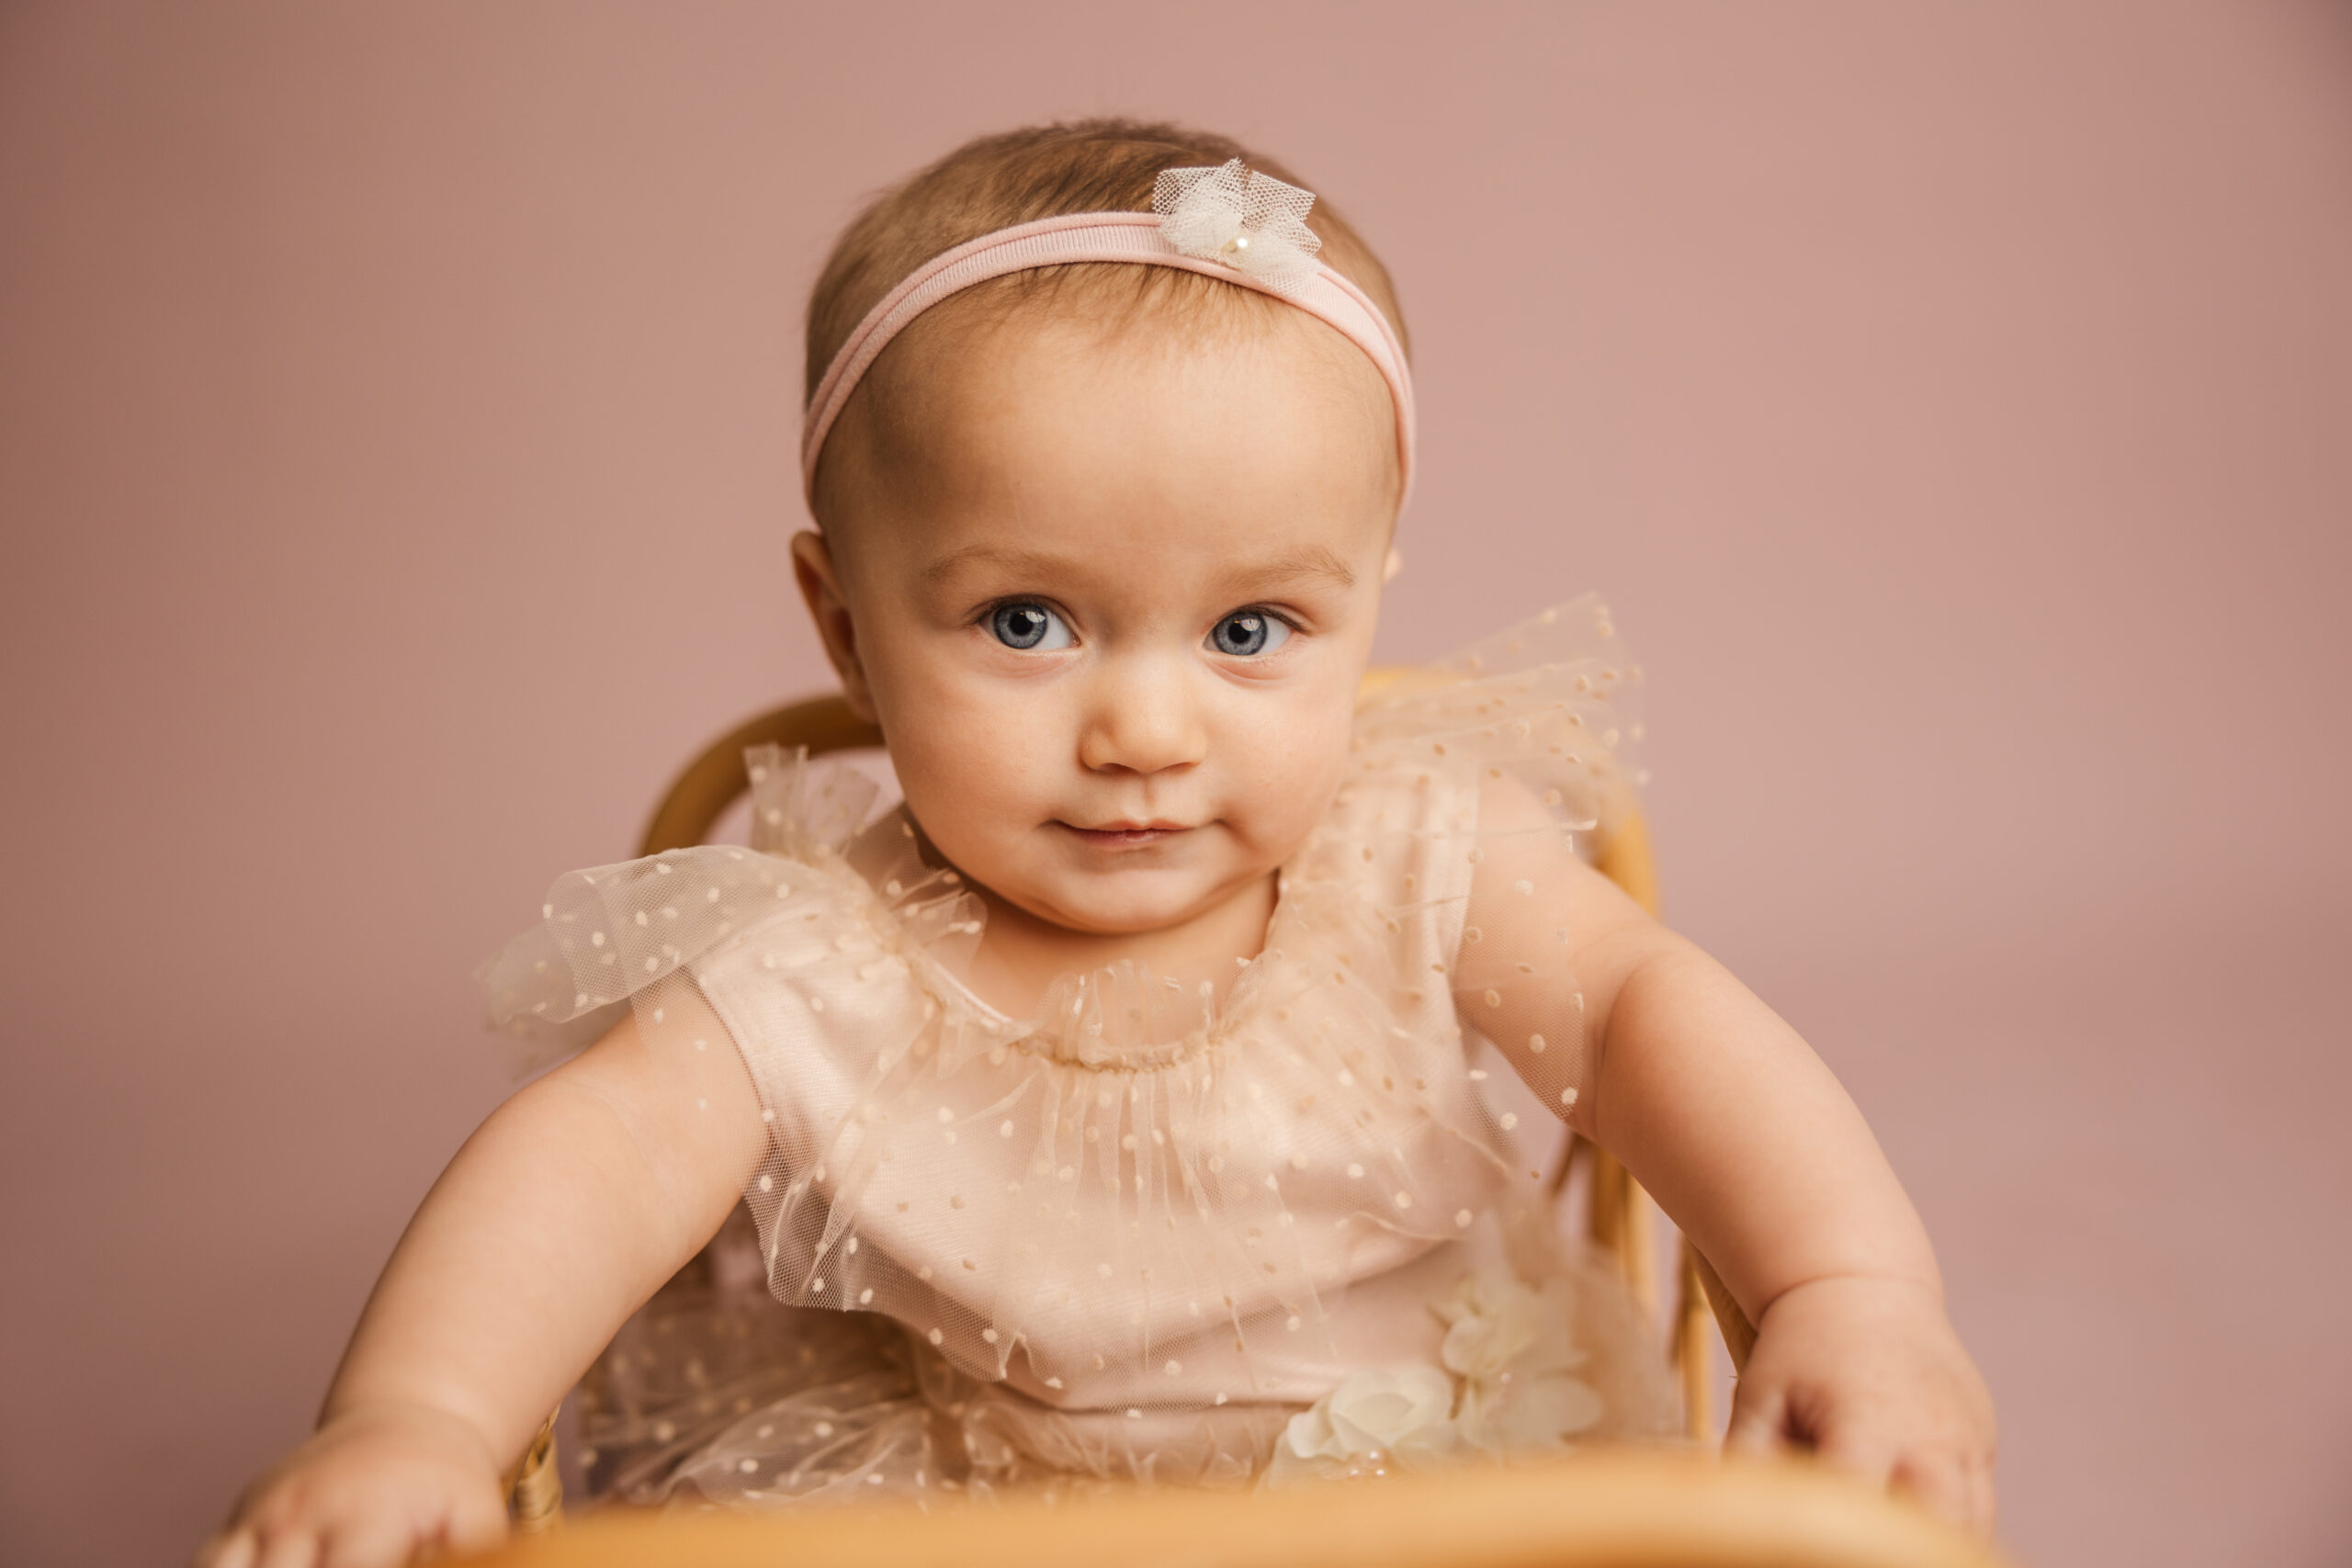 6 month old baby girl during her milestone session in the studio. 
Buy Buy Baby Augusta